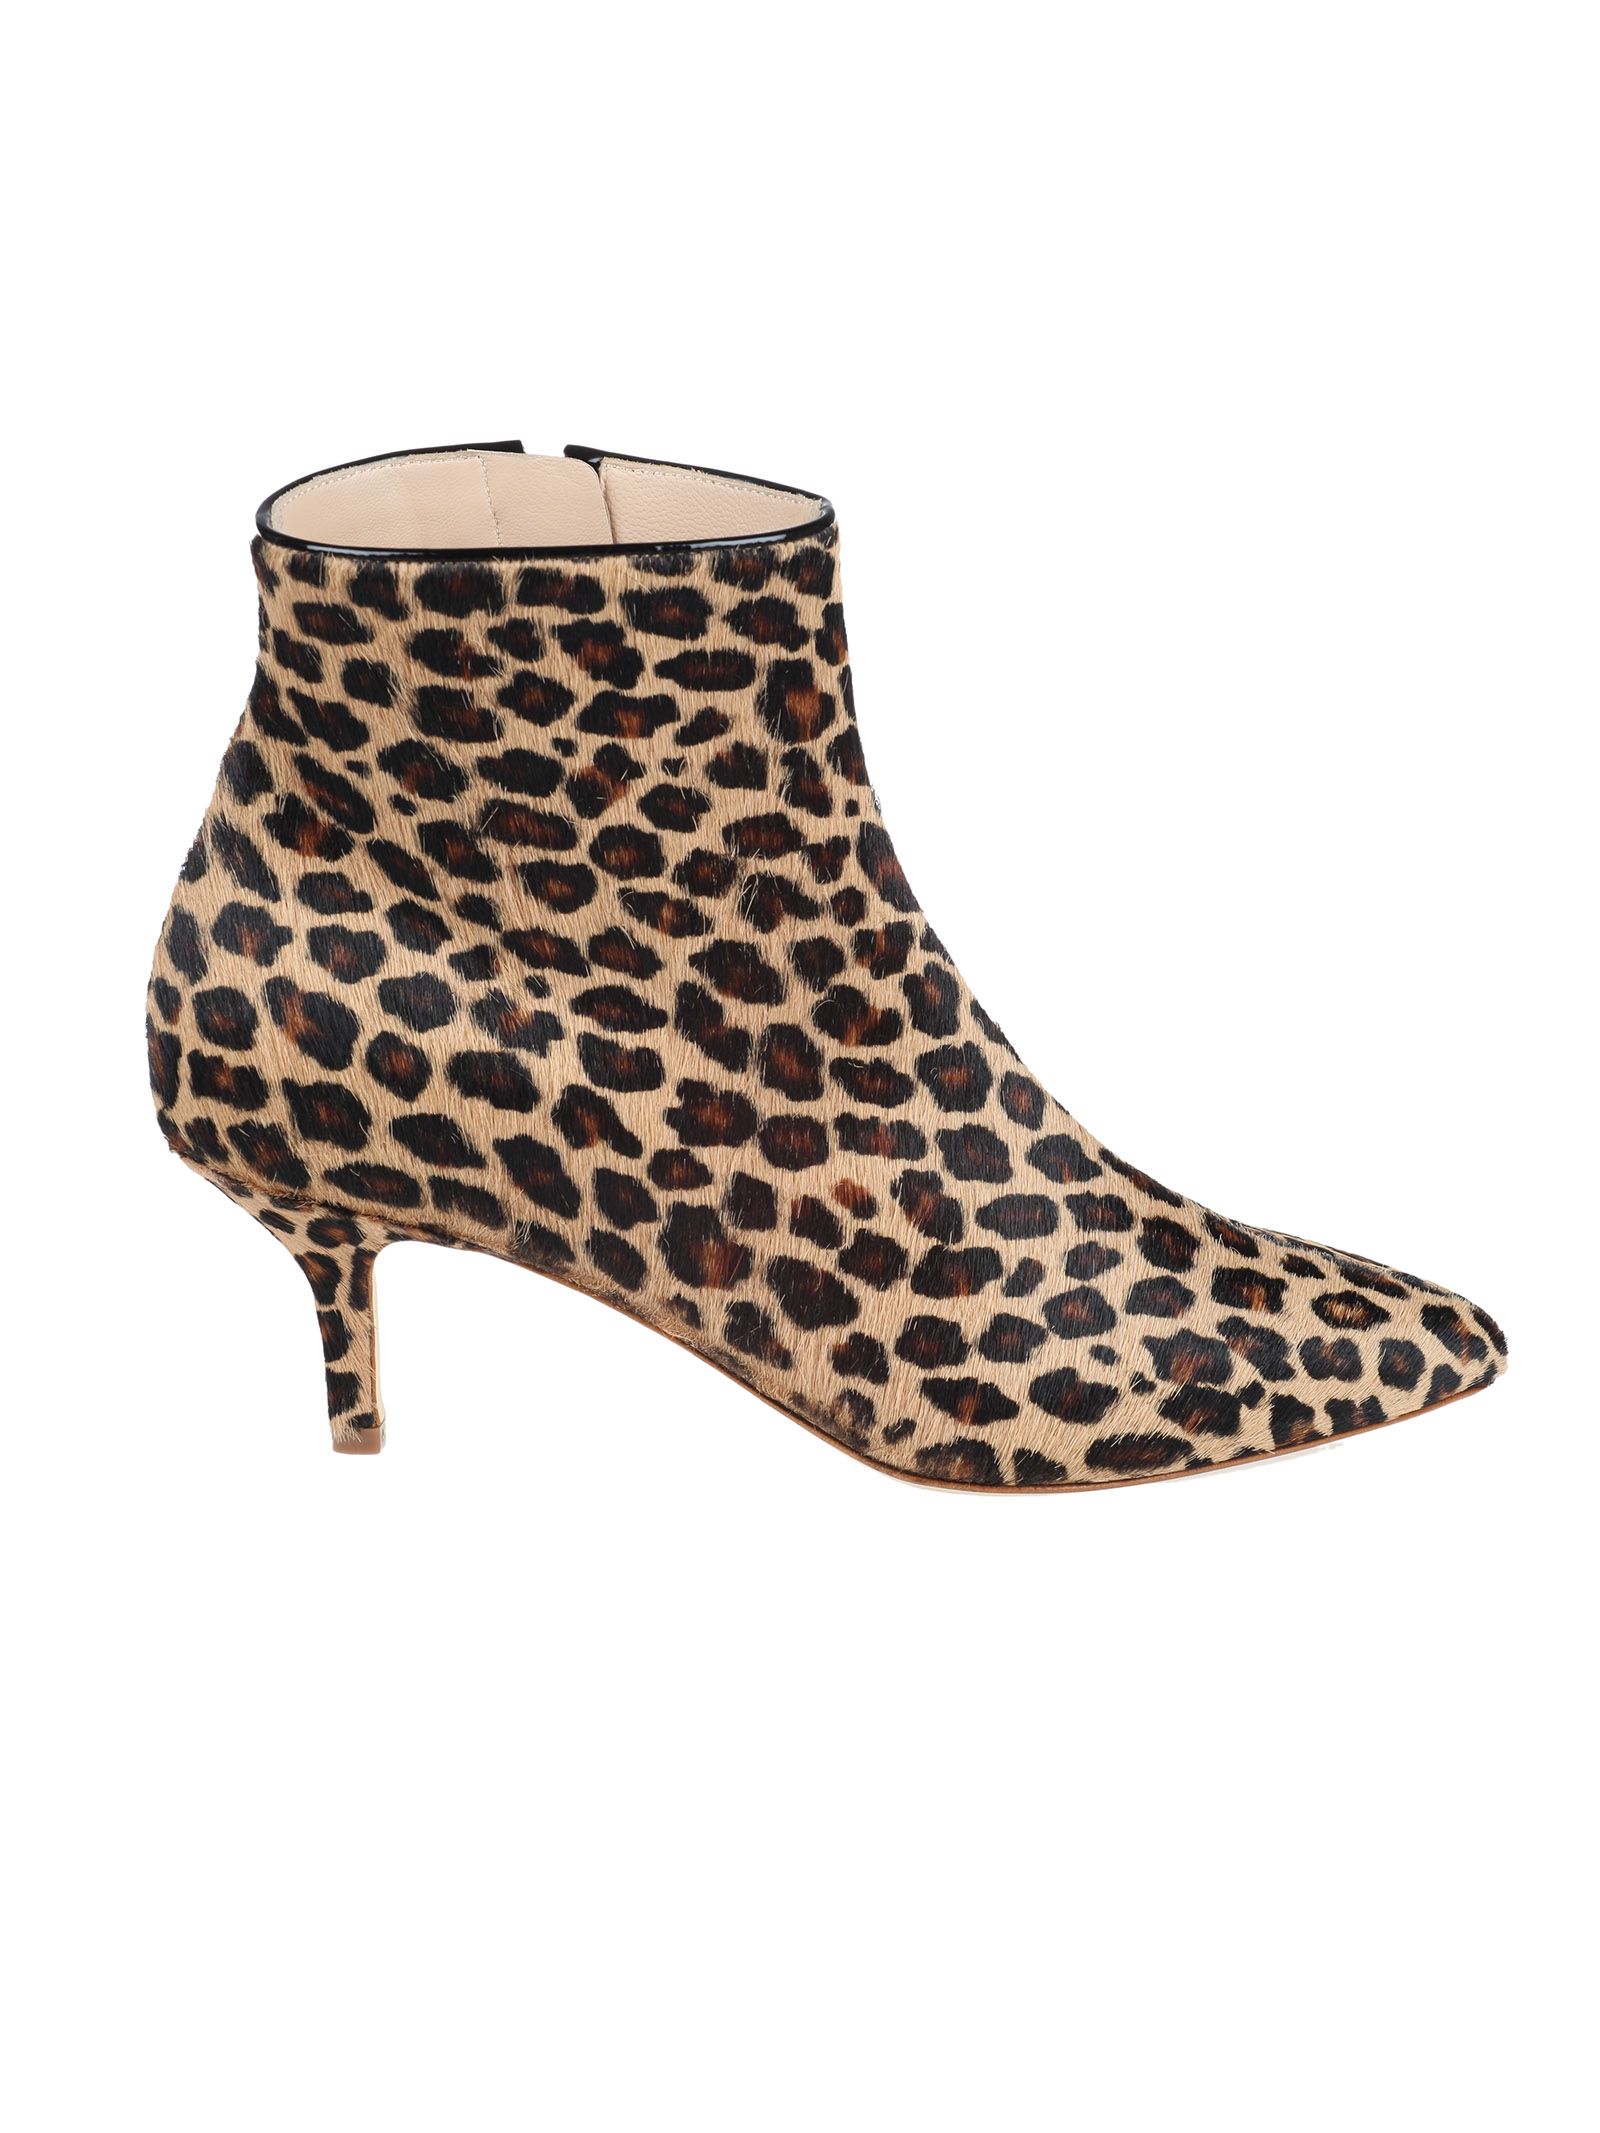 Polly Plume JANIS ANKLE BOOTS